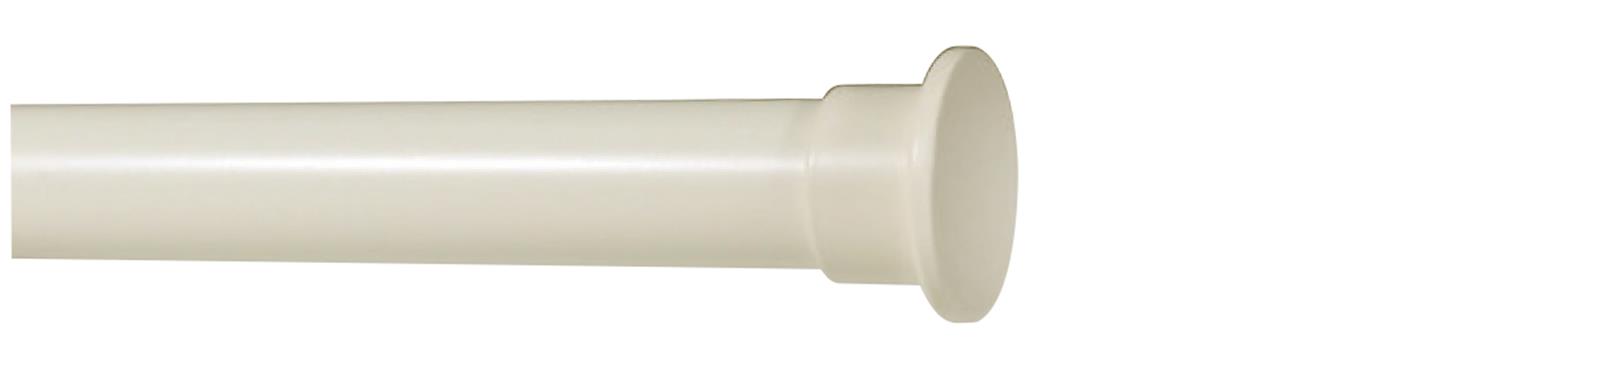 Cameron Fuller 32mm Metal Curtain Pole Almond Stopper